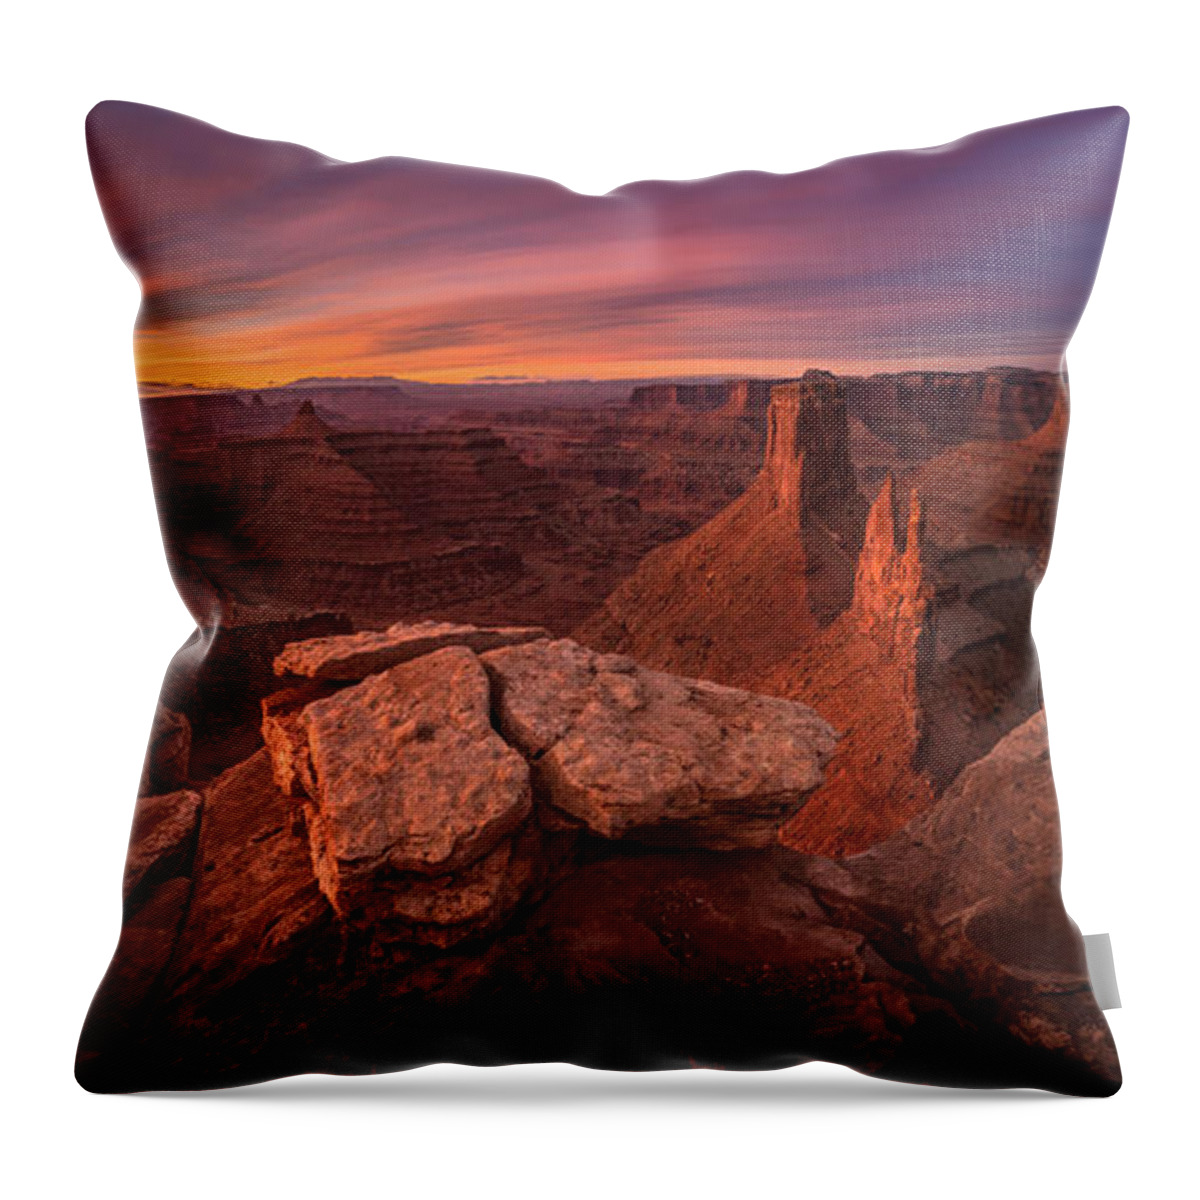 Southwest Throw Pillow featuring the photograph Southwest Sun by Ryan Smith